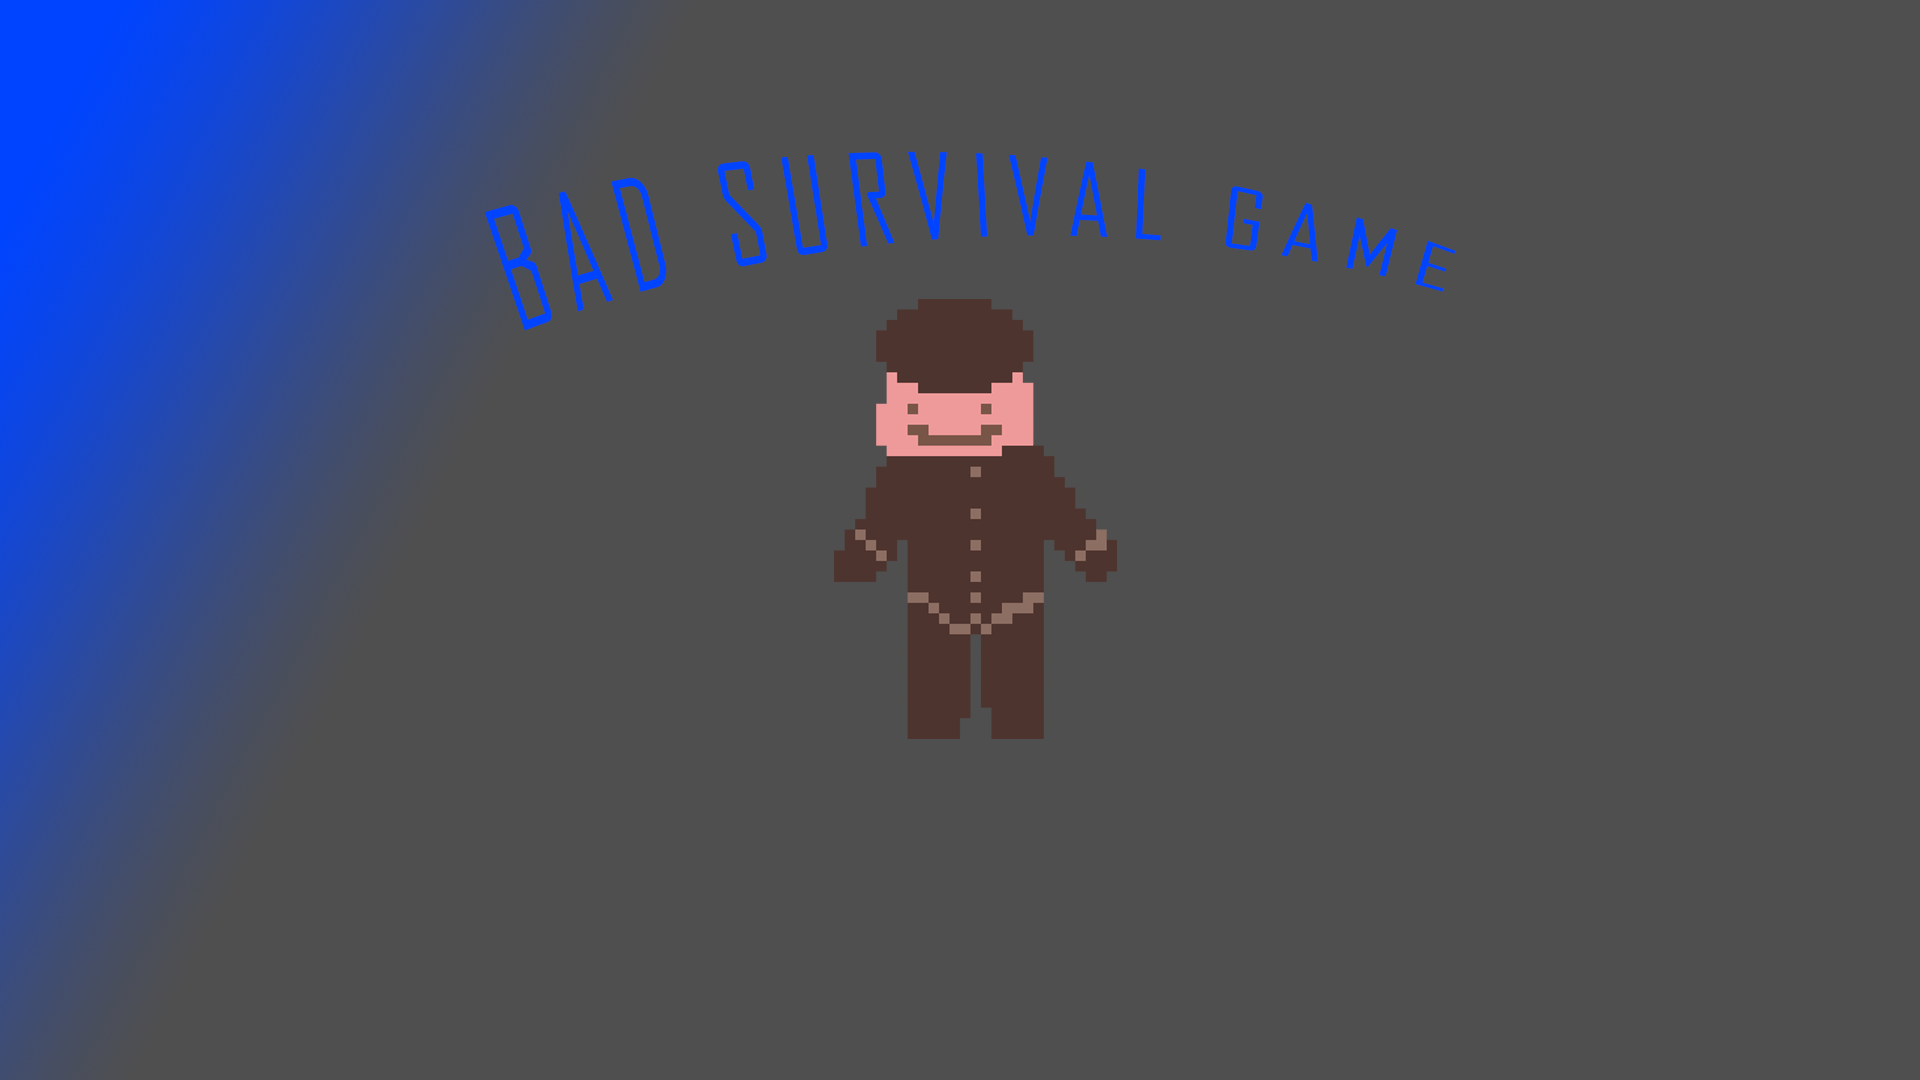 BAD SURVIVAL GAME